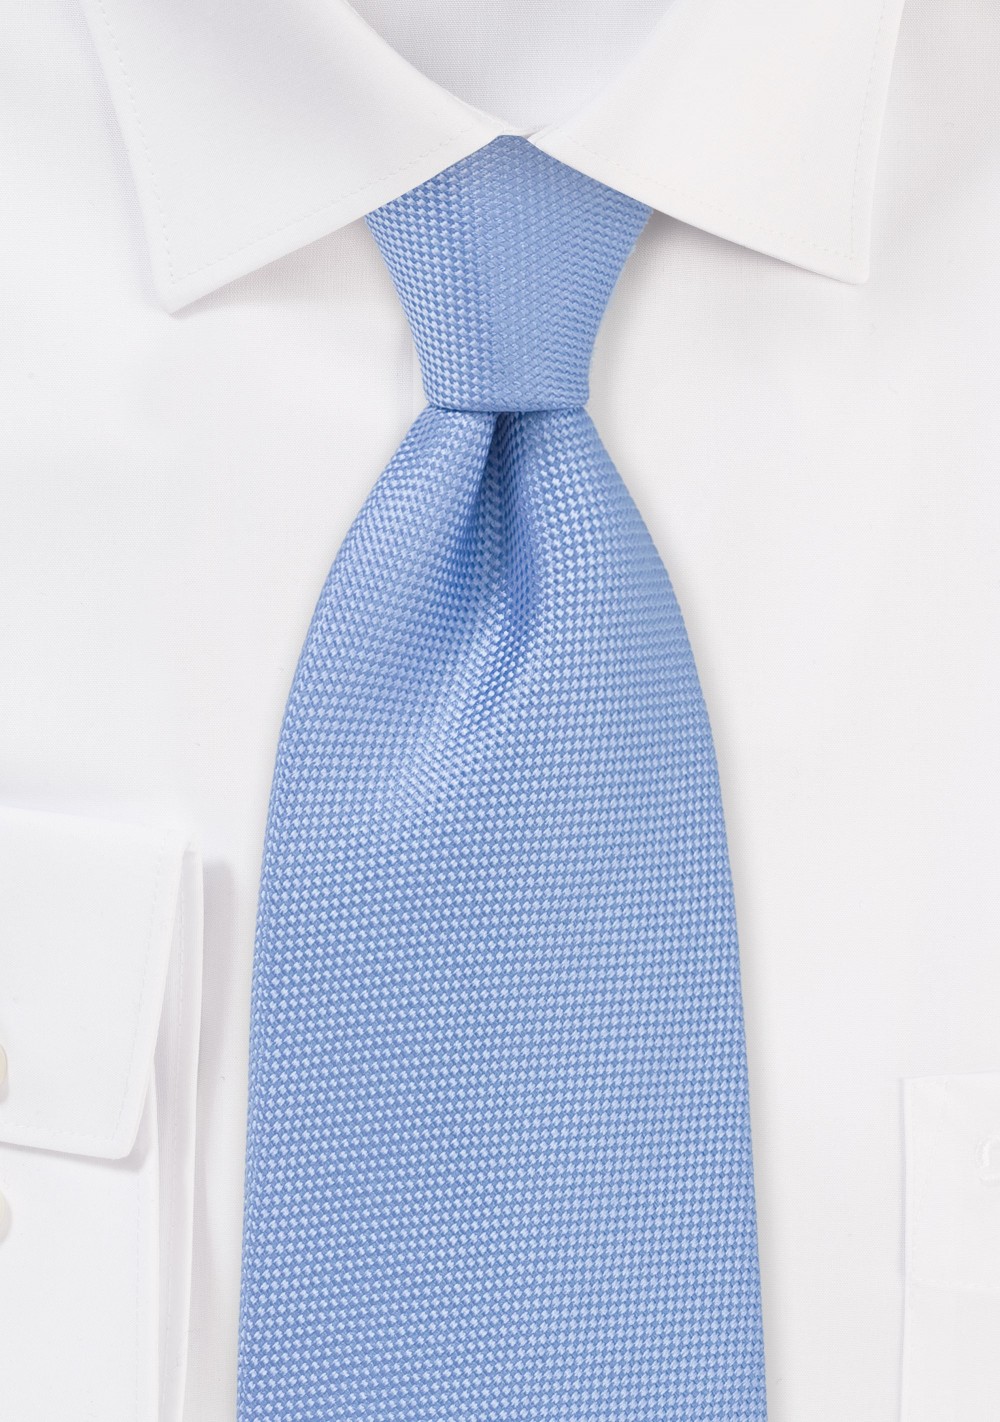 Textured Tie in Light Pacific Blue